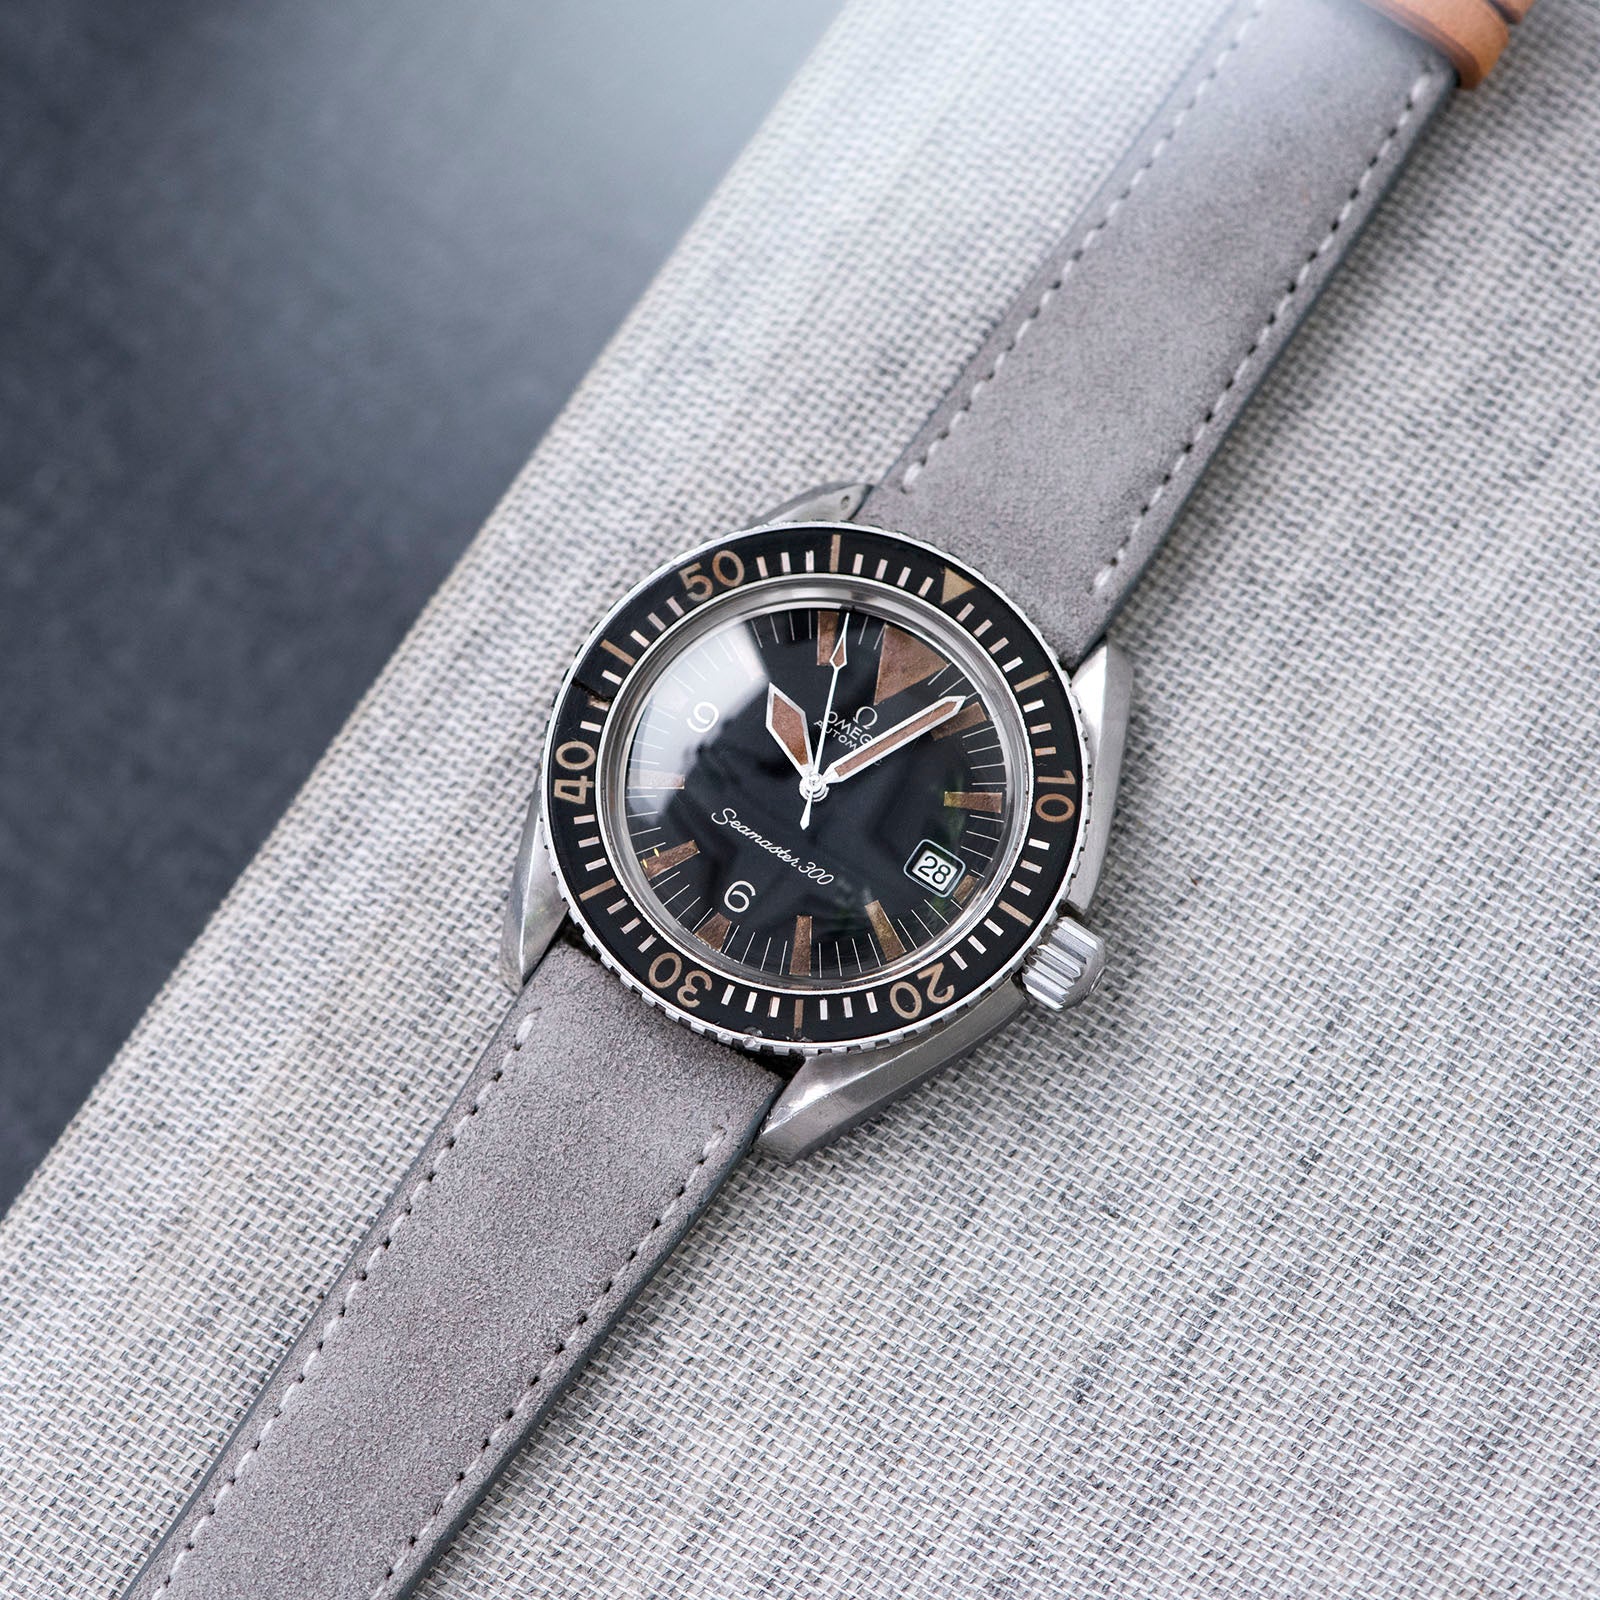 Bulang and Sons_Strap Guide_The omega SM 300 Seamaster_Harbor Grey Silky Suede Leather Watch Strap